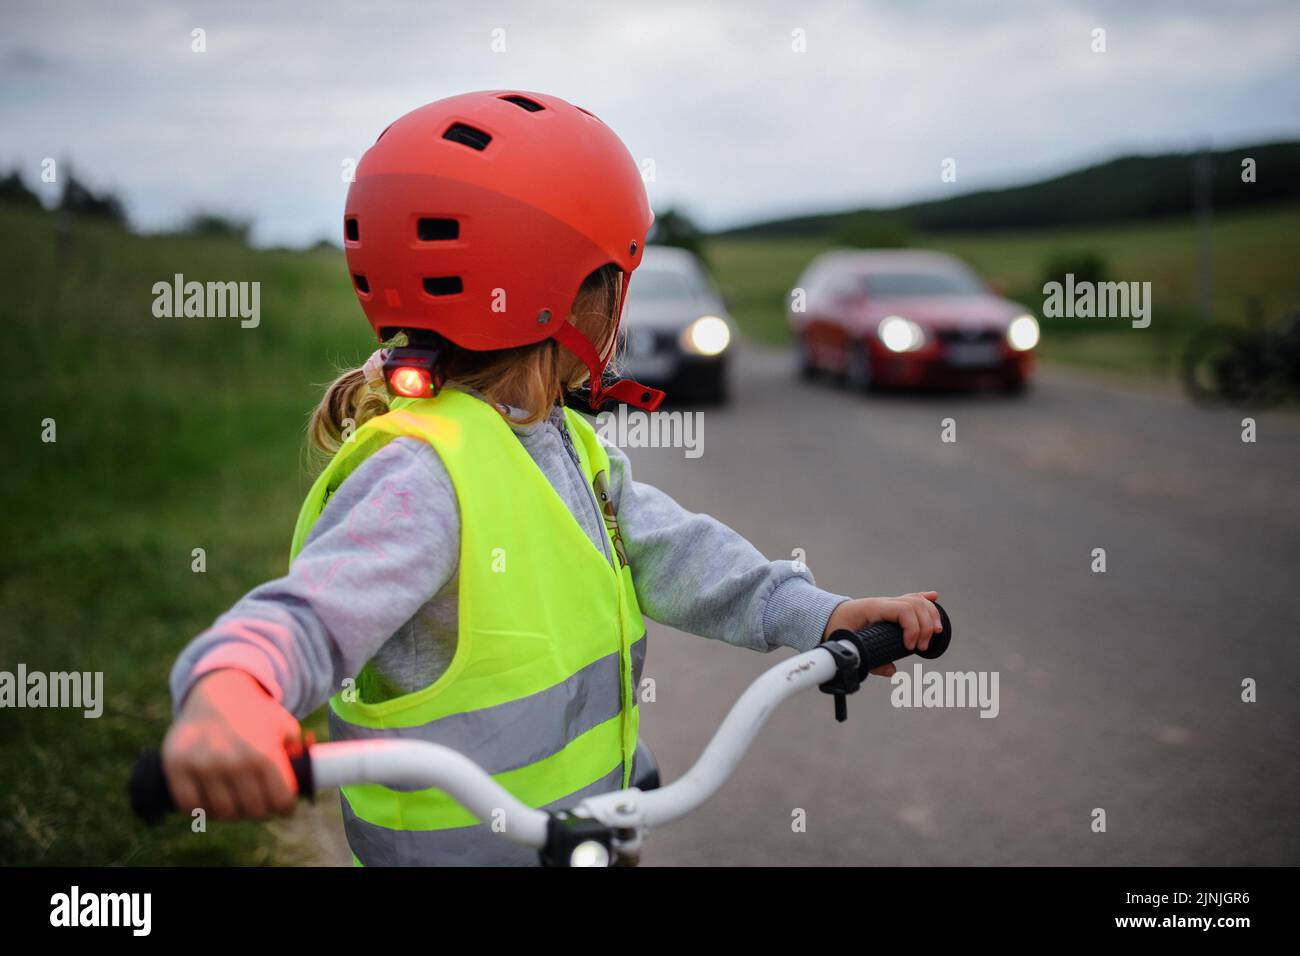 Rear view of little girl in reflective vest riding bike on road with cars behind her, road safety education concept. Stock Photo